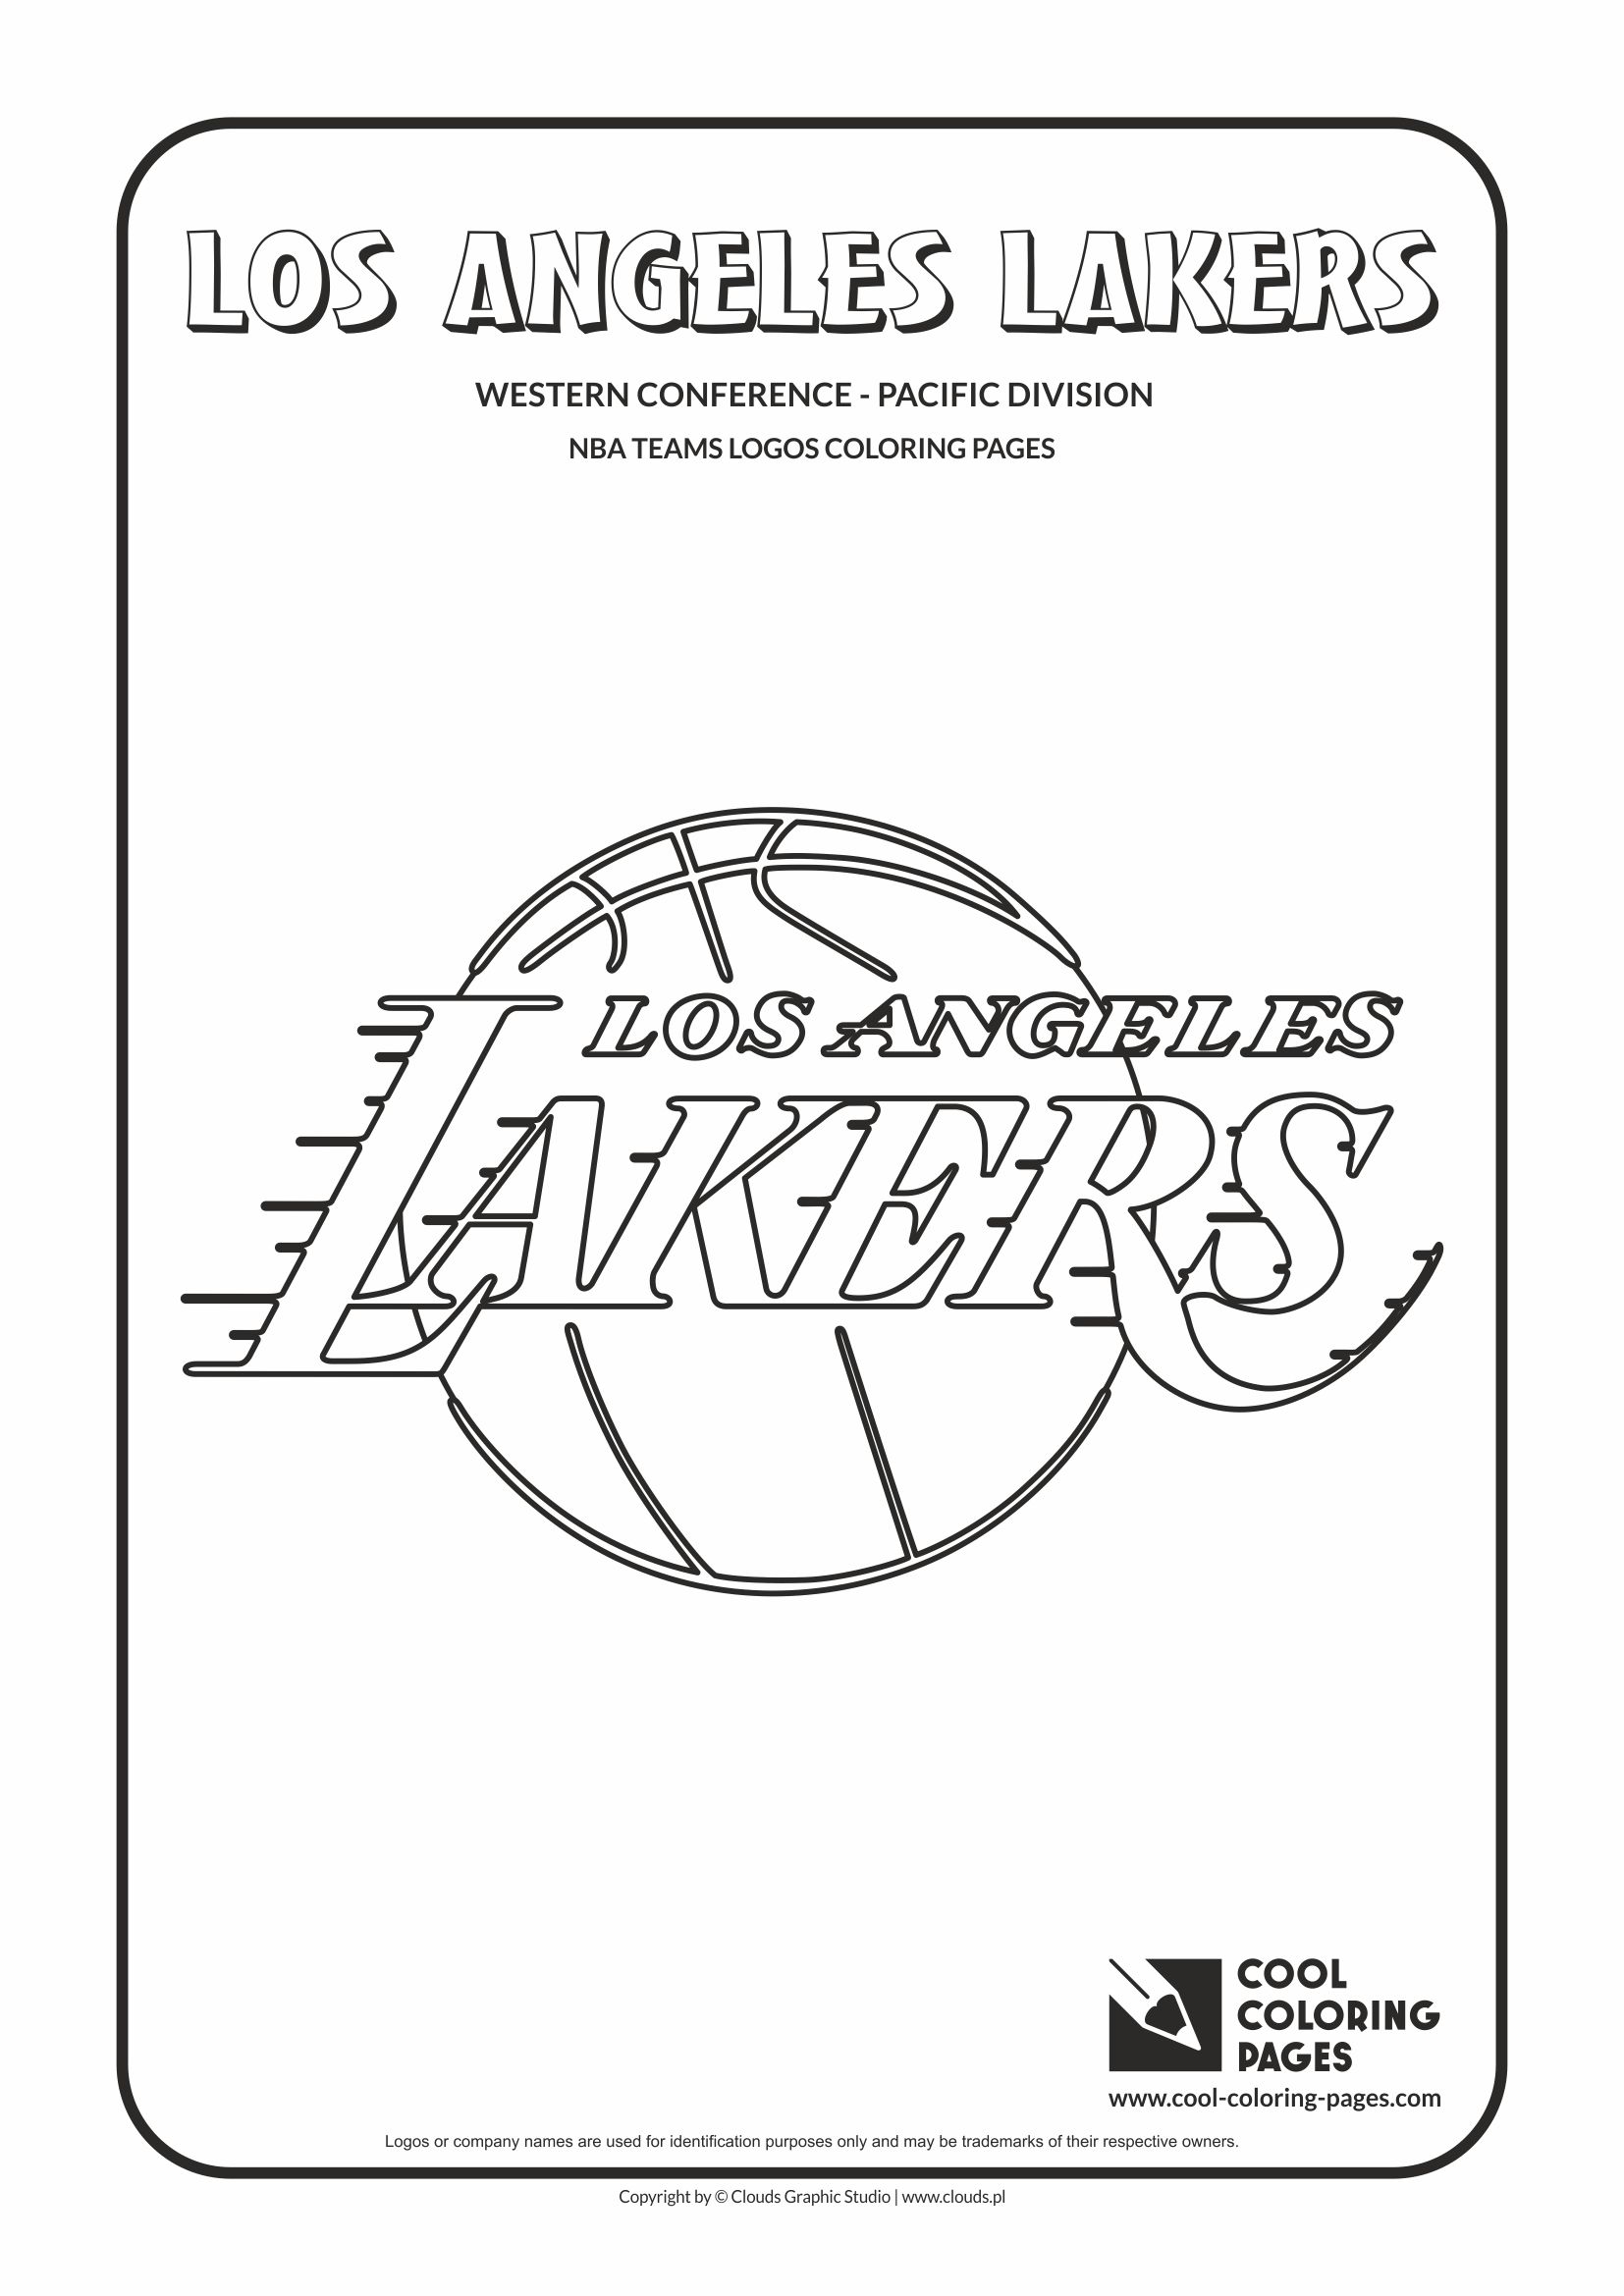 Cool Coloring Pages NBA teams logos coloring pages - Cool ...